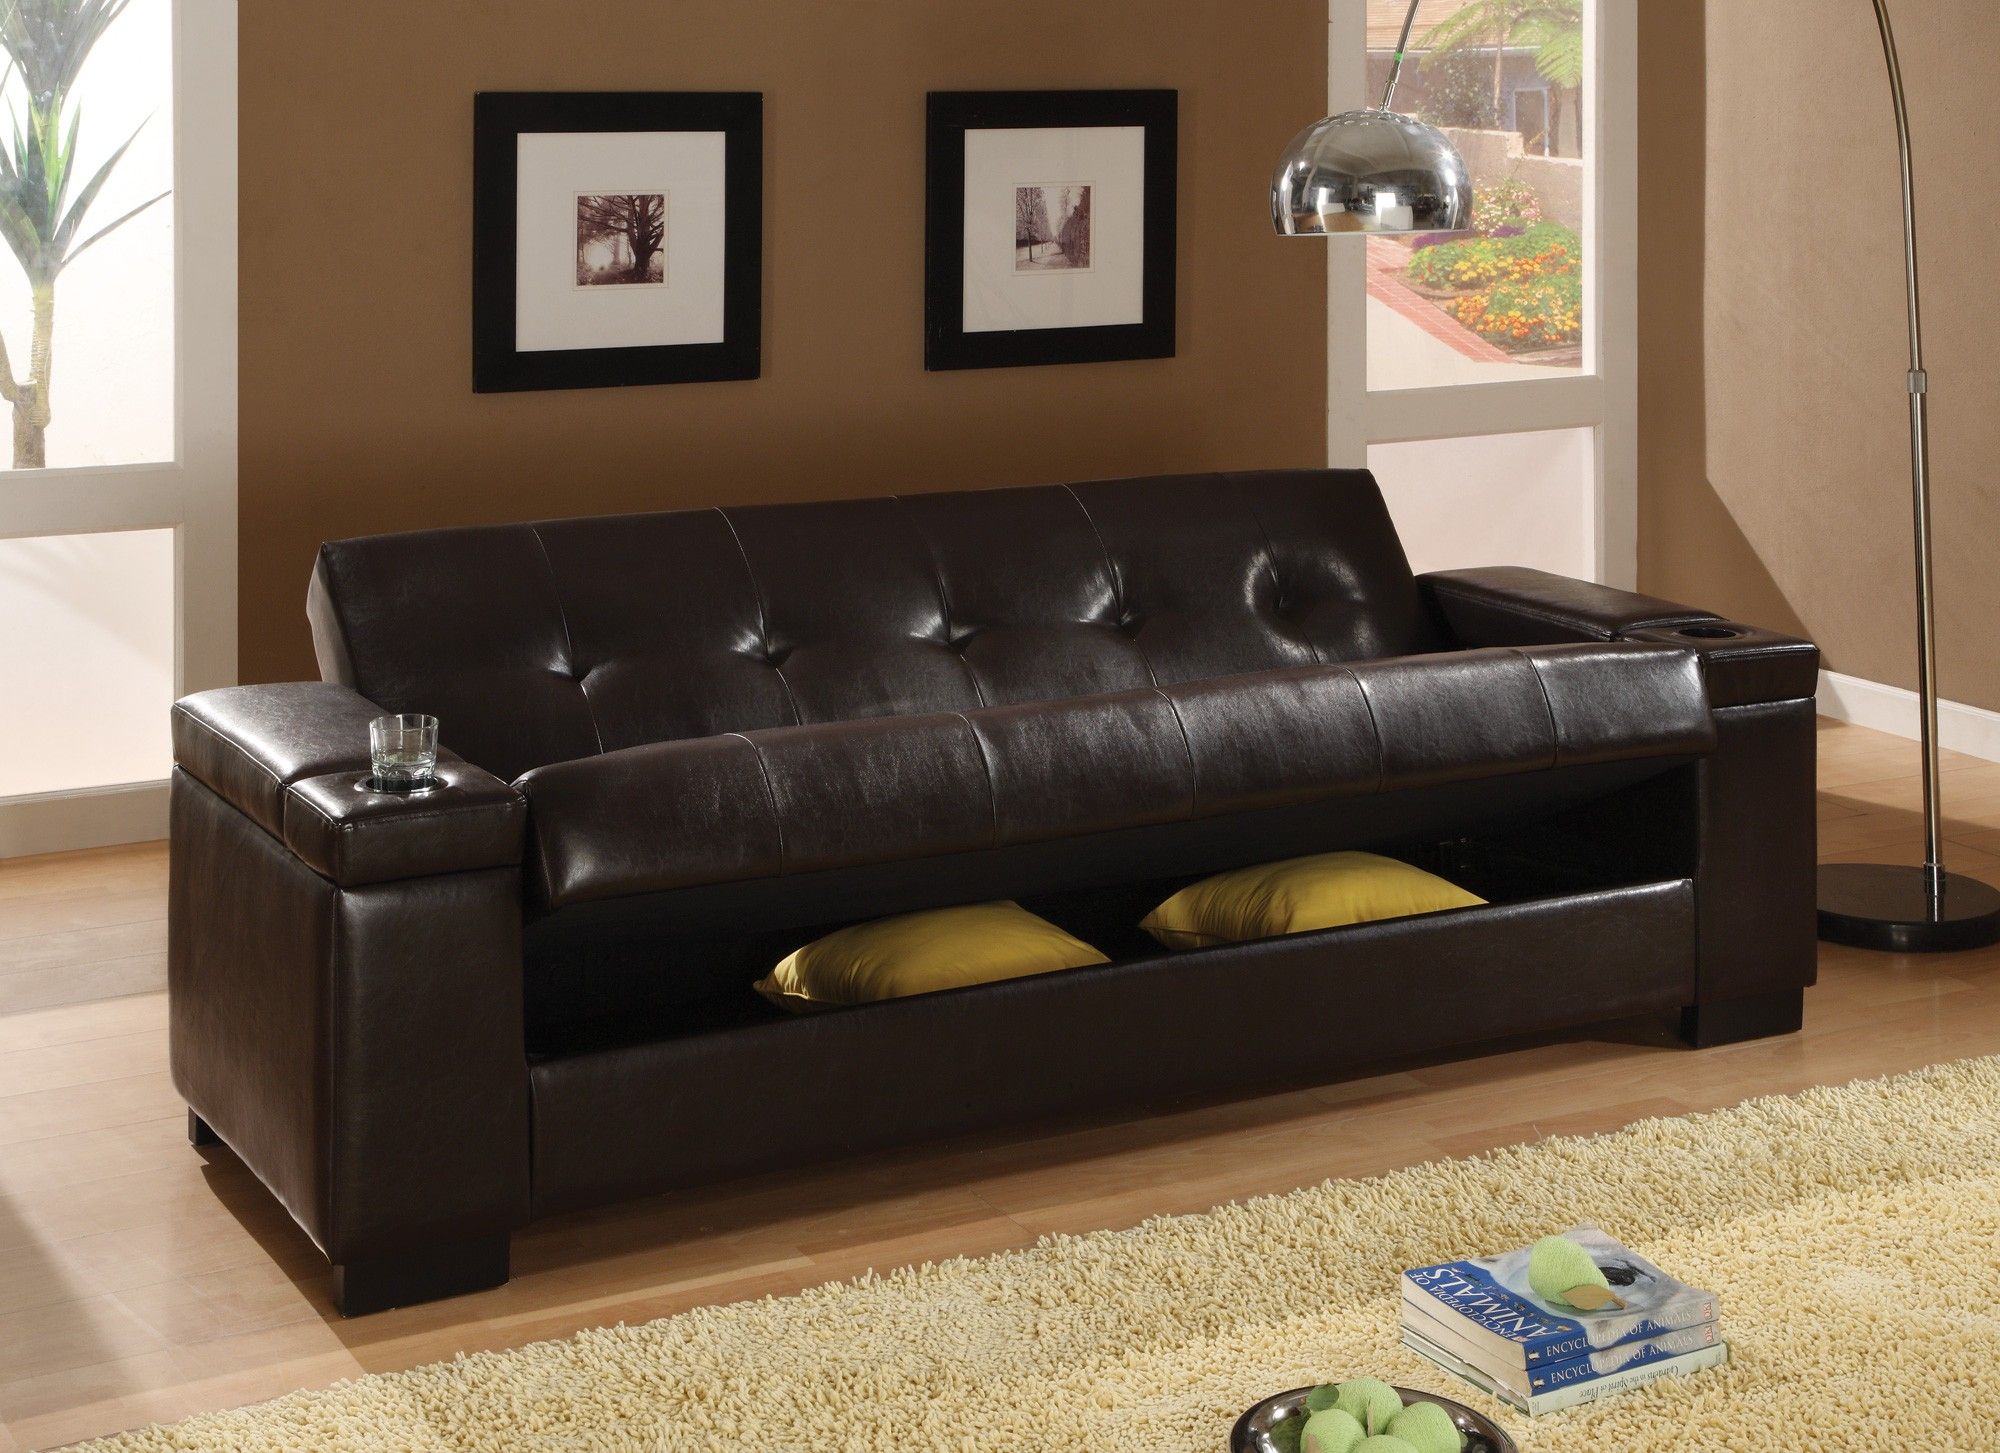 Faux Leather Convertible Sofa Sleeper With Storage 300143 From Coaster Intended For 8 Seat Convertible Sofas (View 8 of 20)